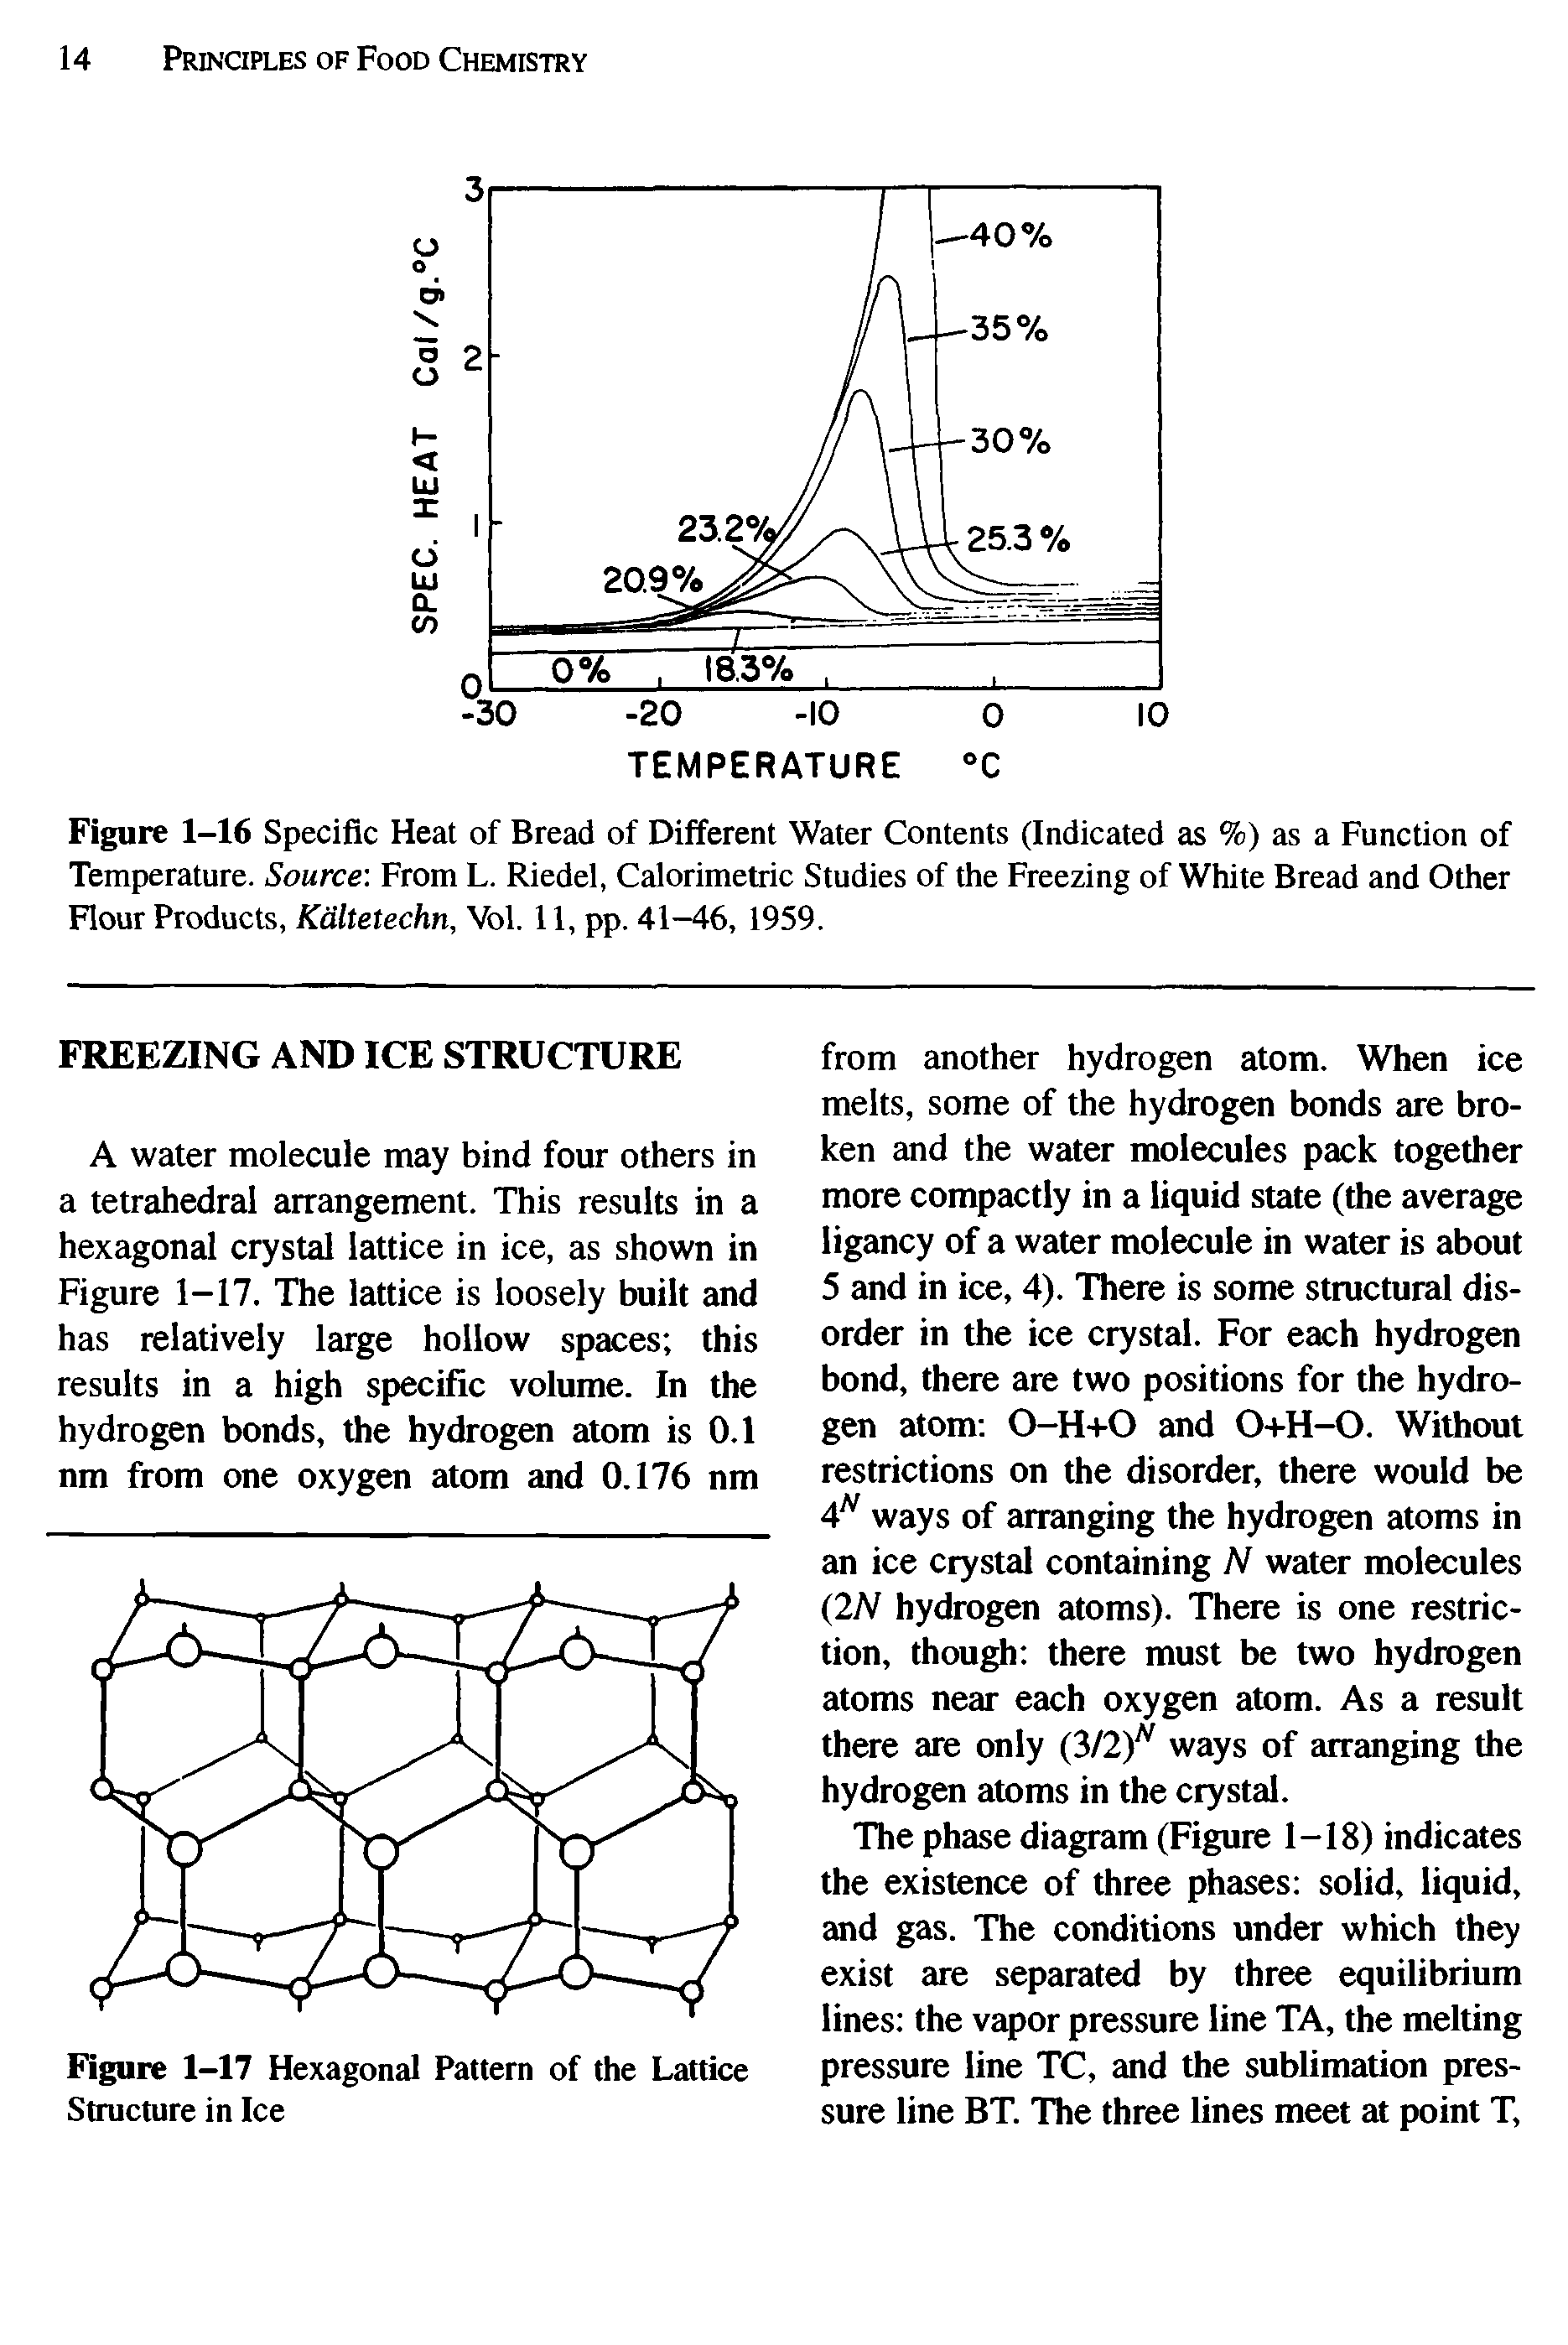 Figure 1-16 Specific Heat of Bread of Different Water Contents (Indicated as %) as a Function of Temperature. Source. From L. Riedel, Calorimetric Studies of the Freezing of White Bread and Other Flour Products, Kaltetechn, Vol. 11, pp. 41—46, 1959.